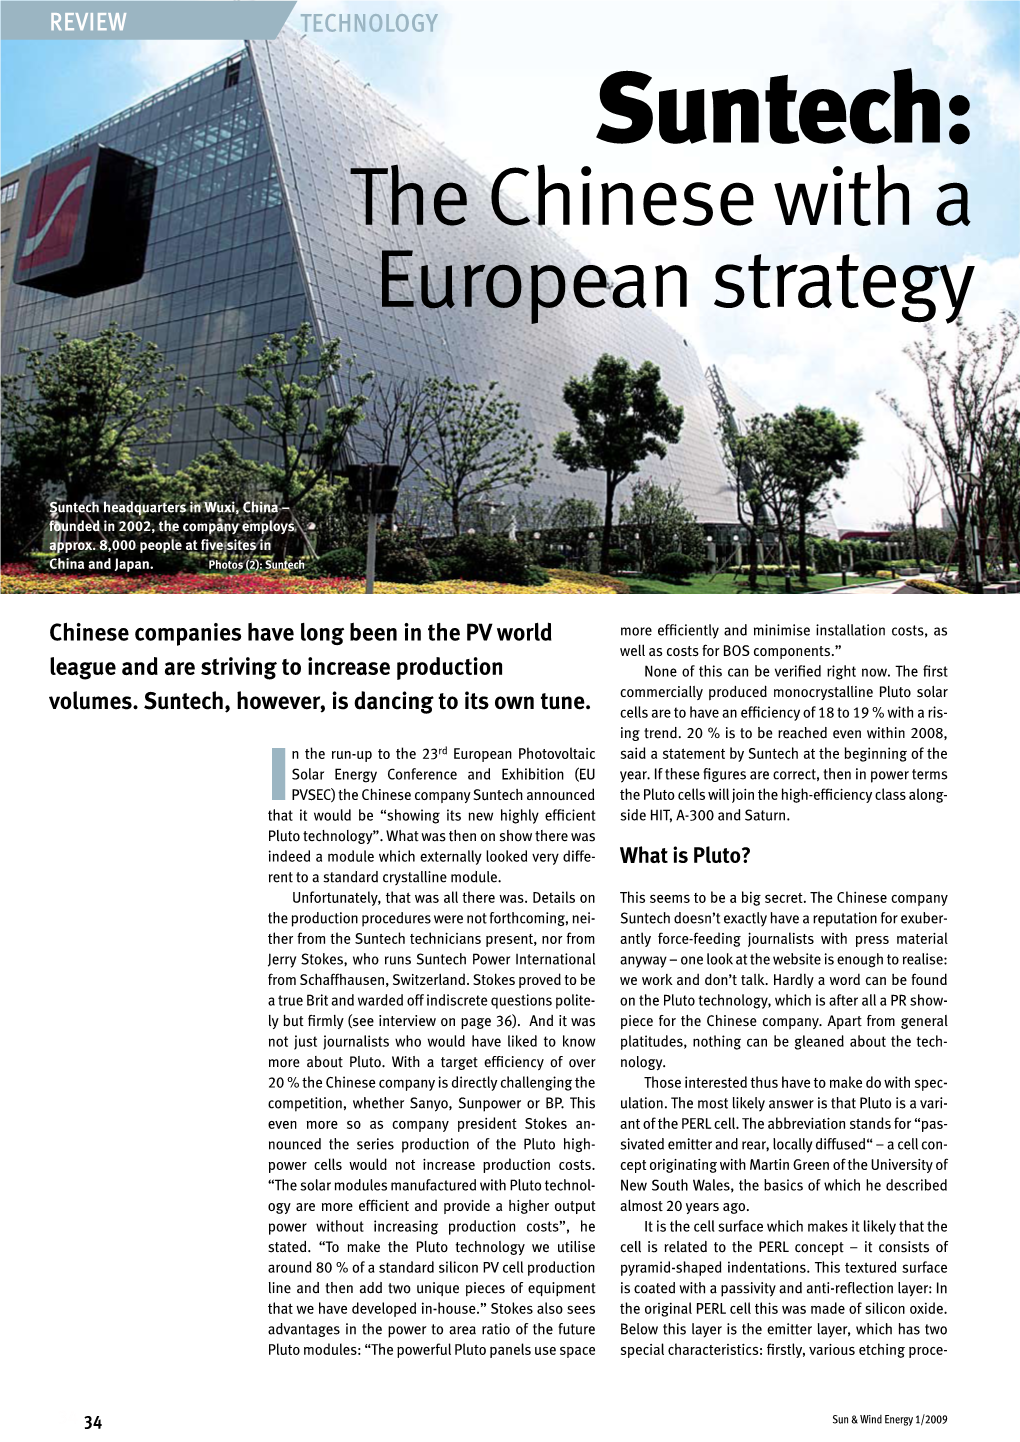 Suntech: the Chinese with a European Strategy